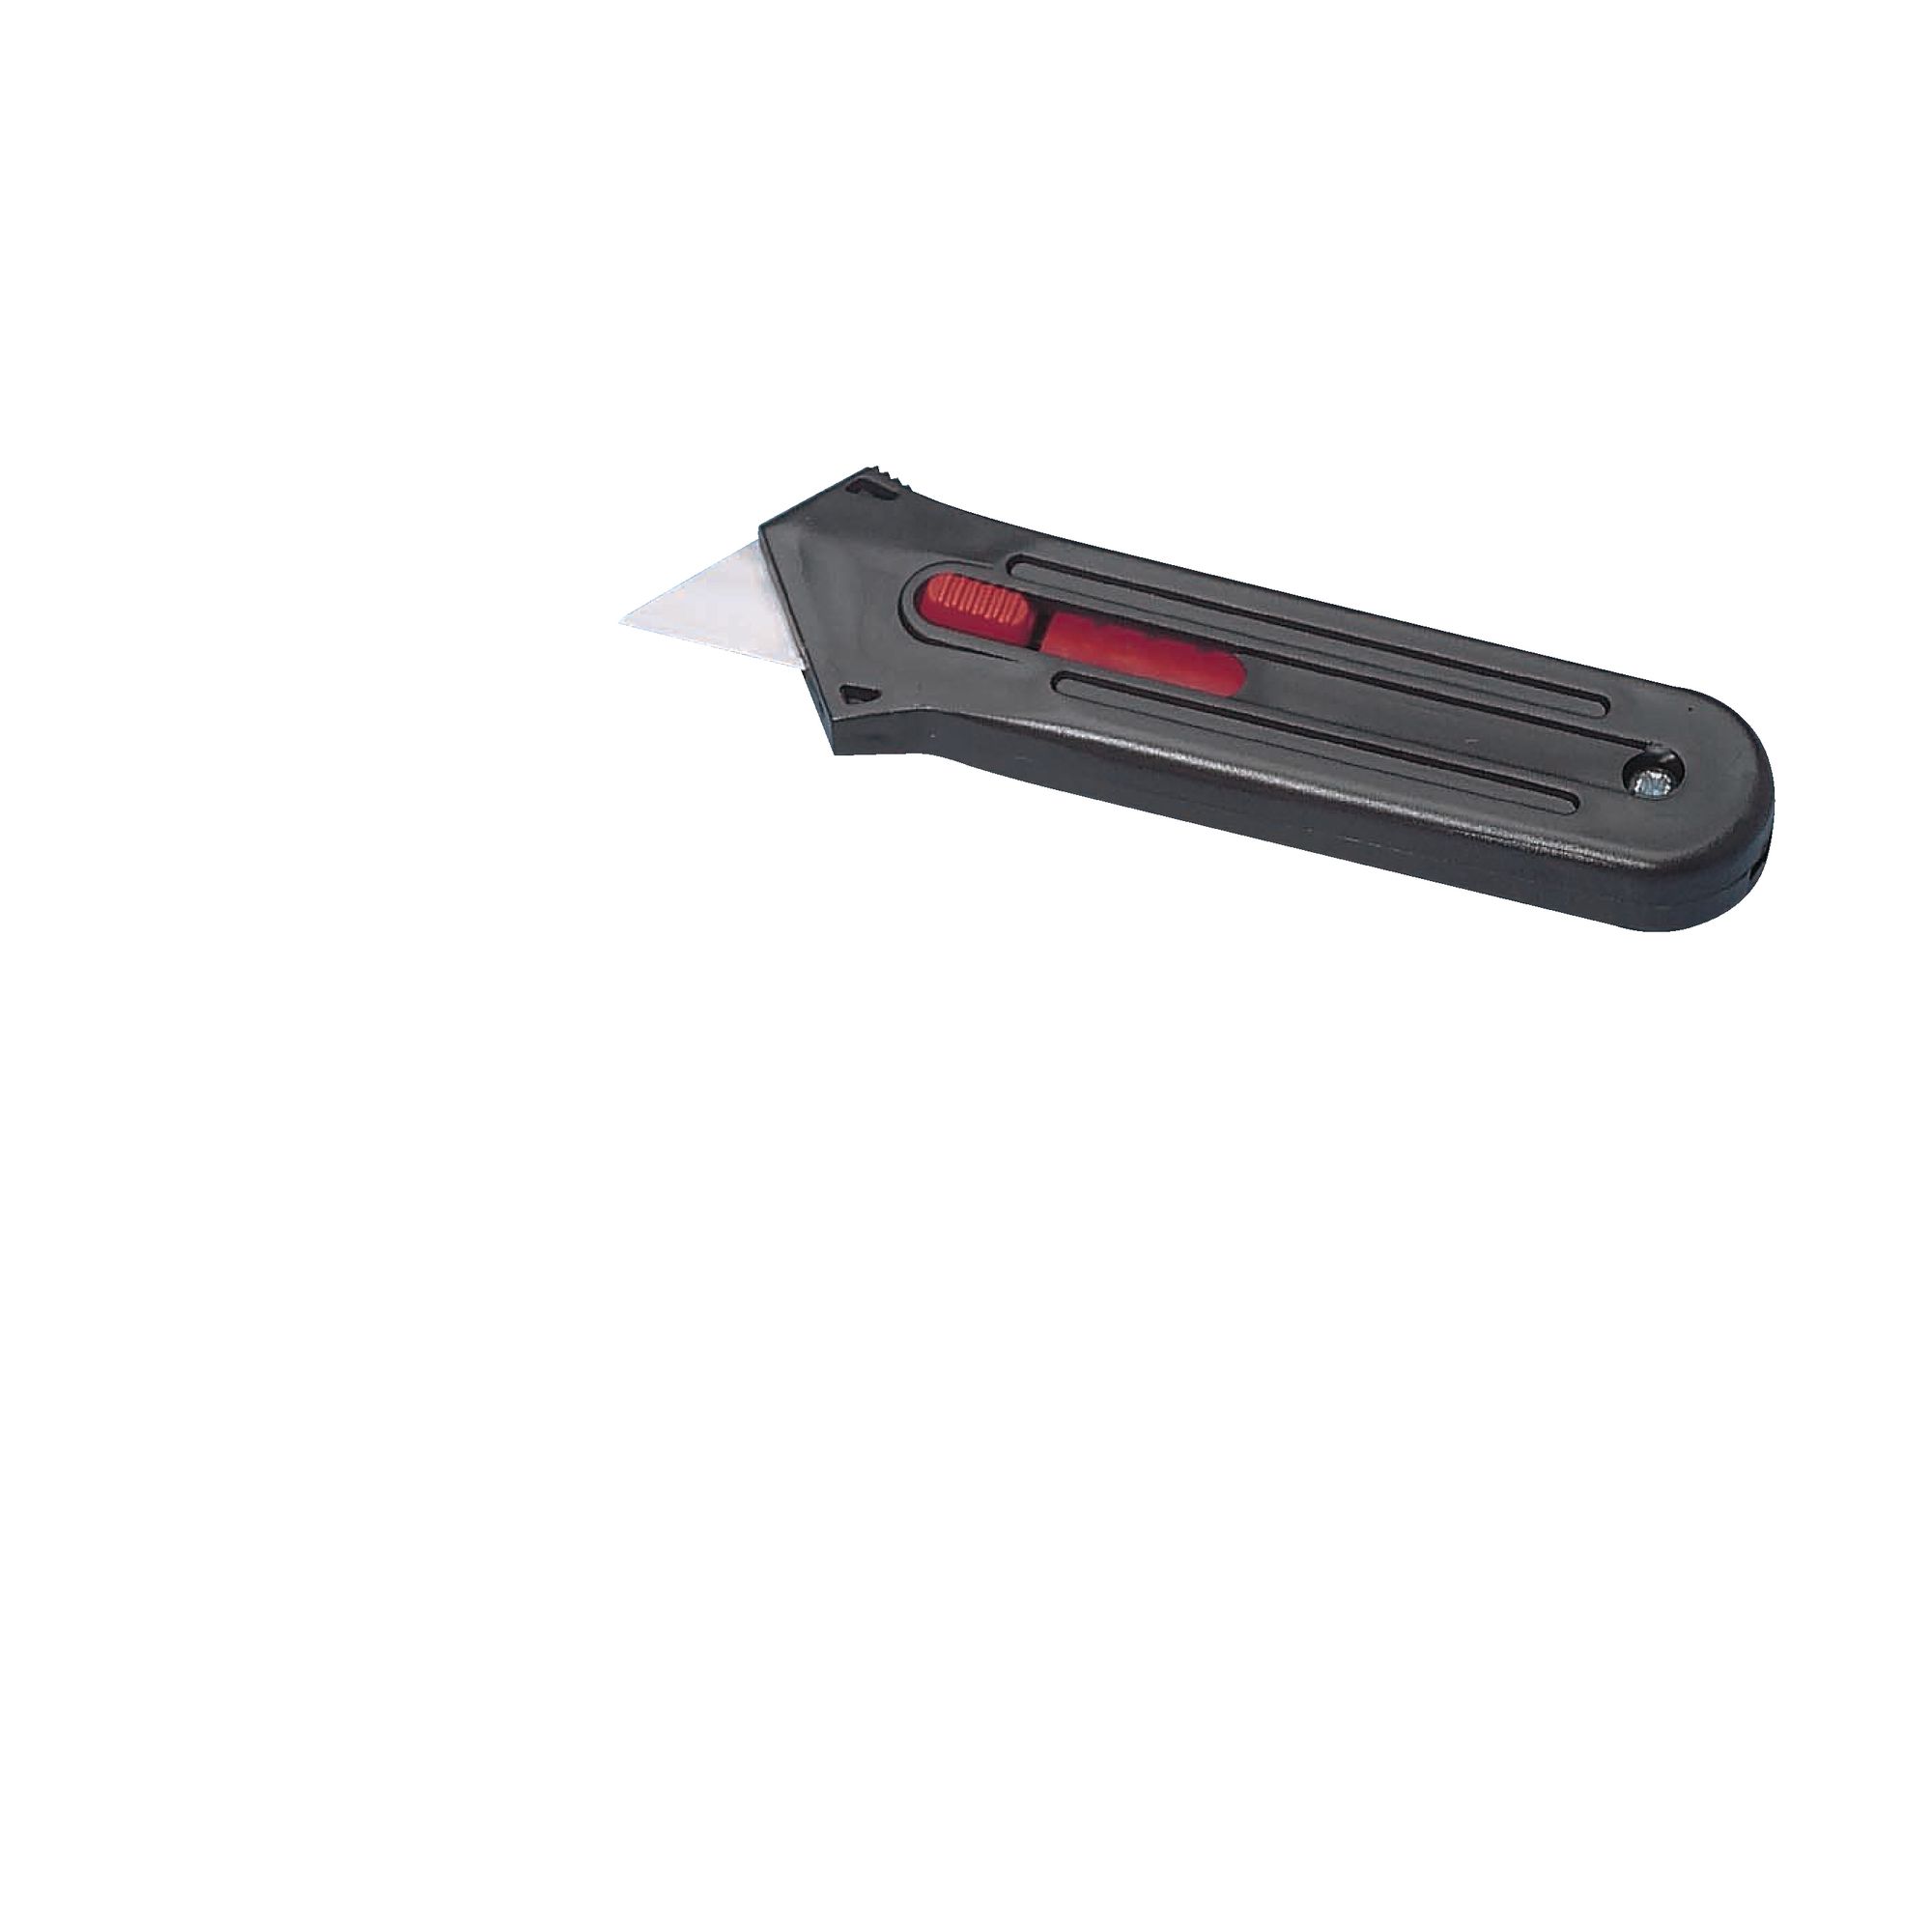 Blades for Retractable Knife pk10